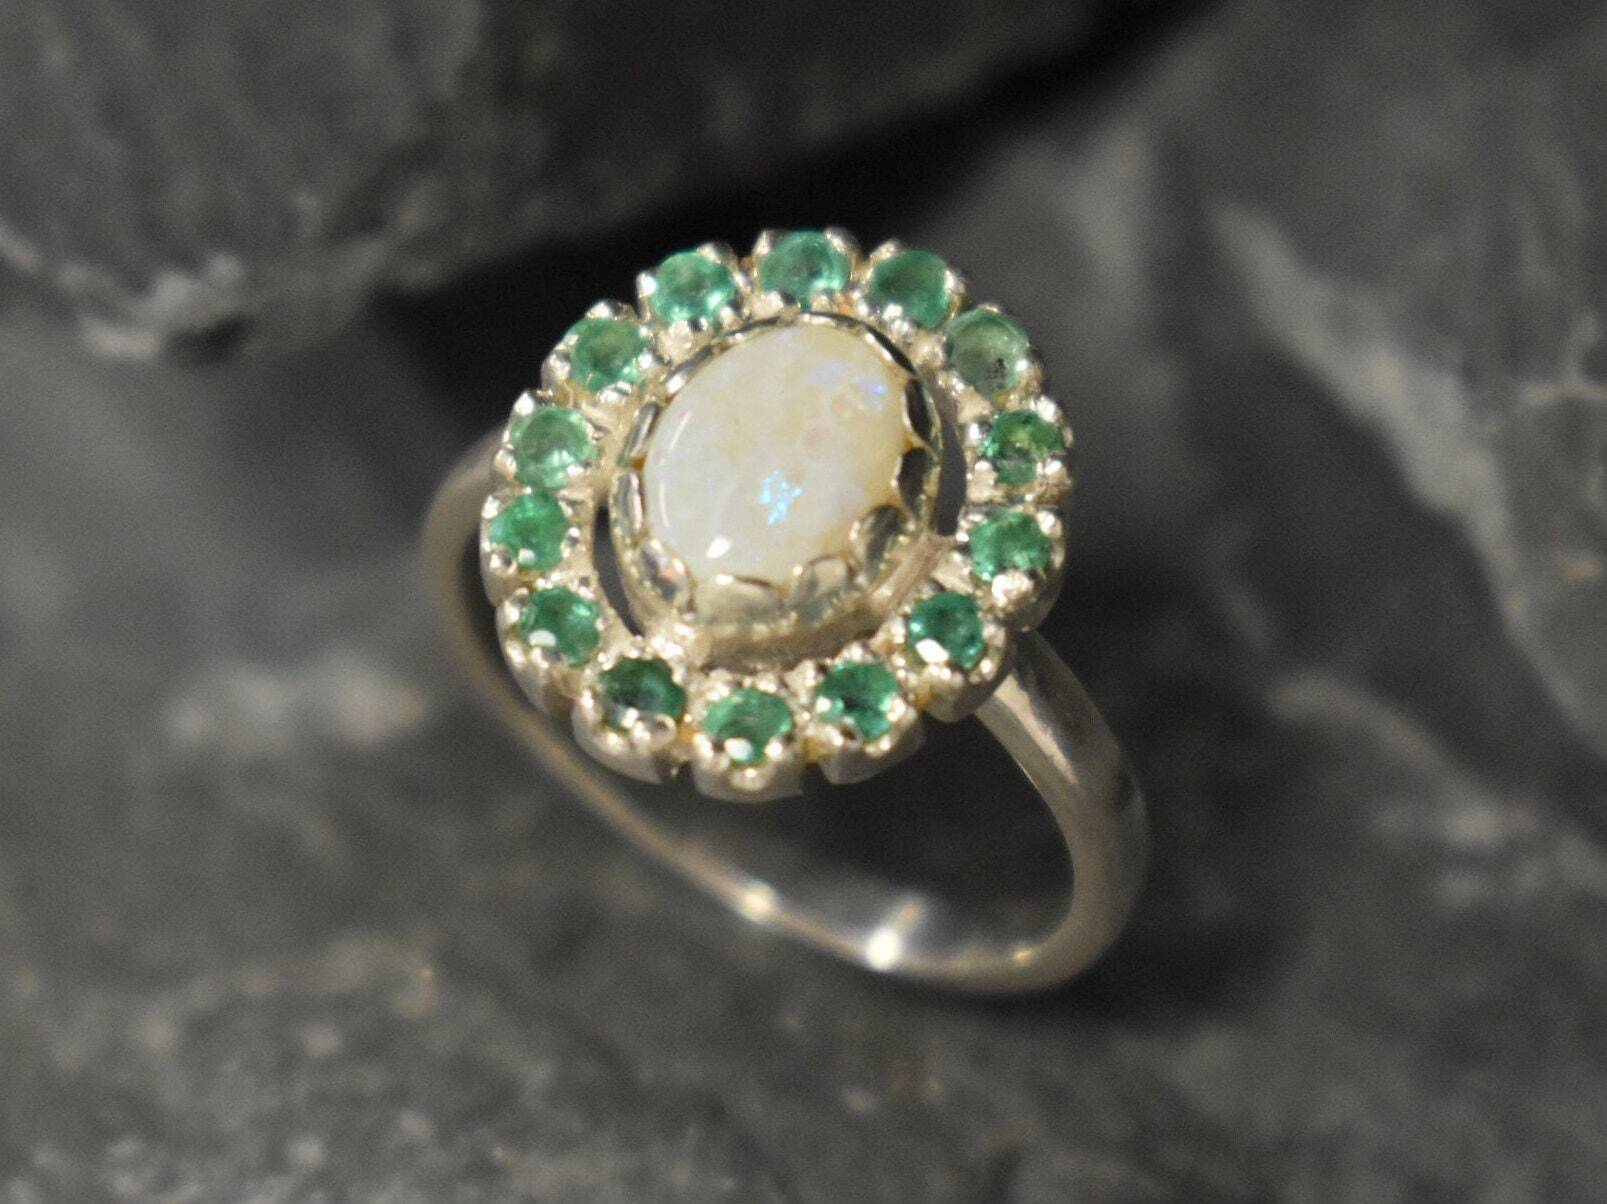 Victorian Opal Ring - Opal Flower Ring - White Green Vintage Ring